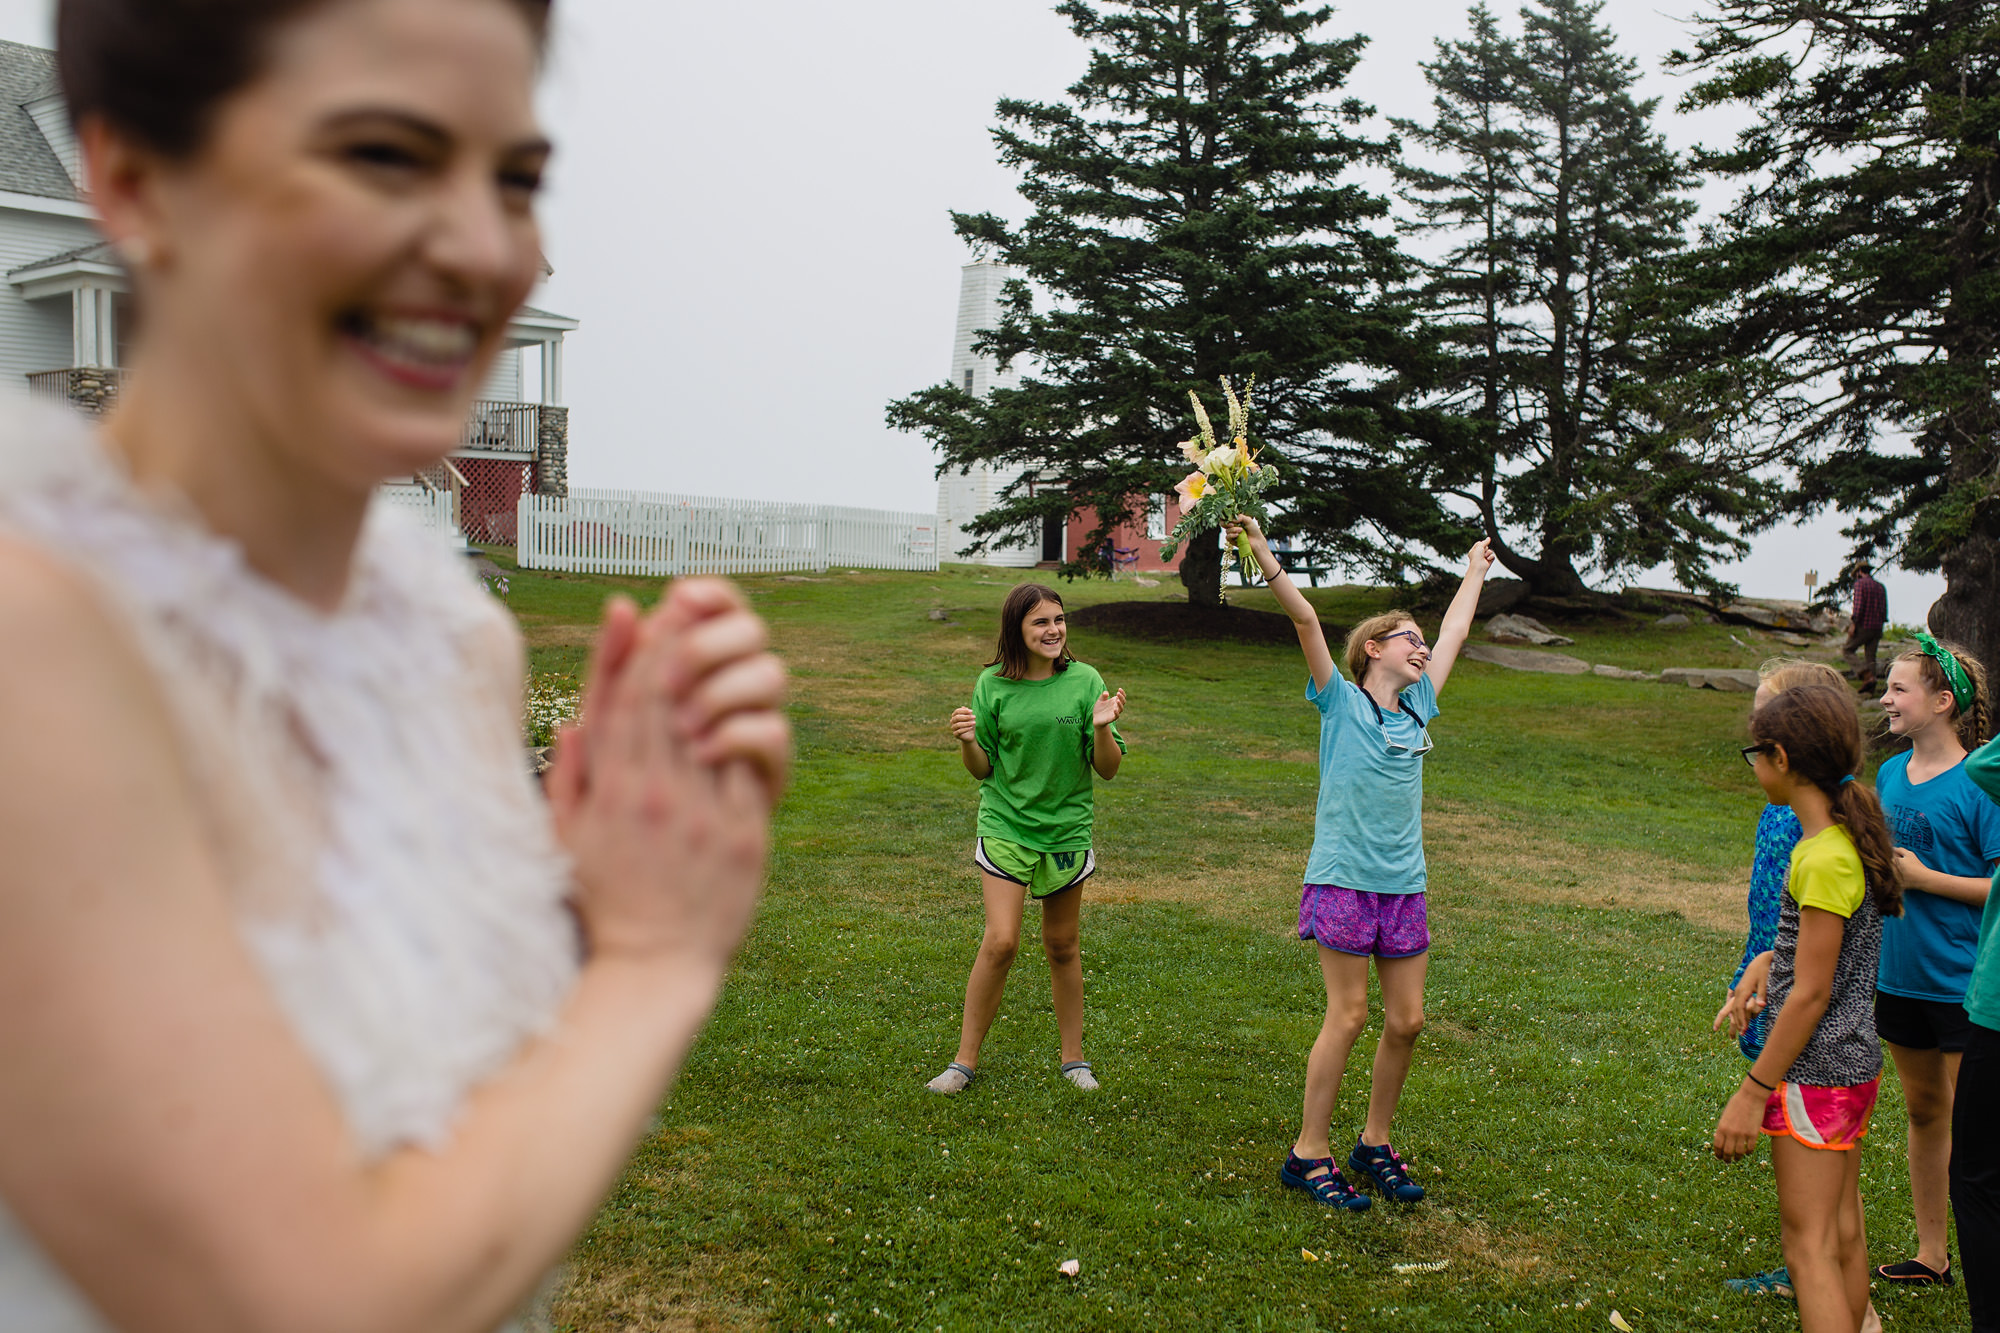 A bride throws her bouquet to a group of girls at a wedding at Pemaquid Point lighthouse in Maine